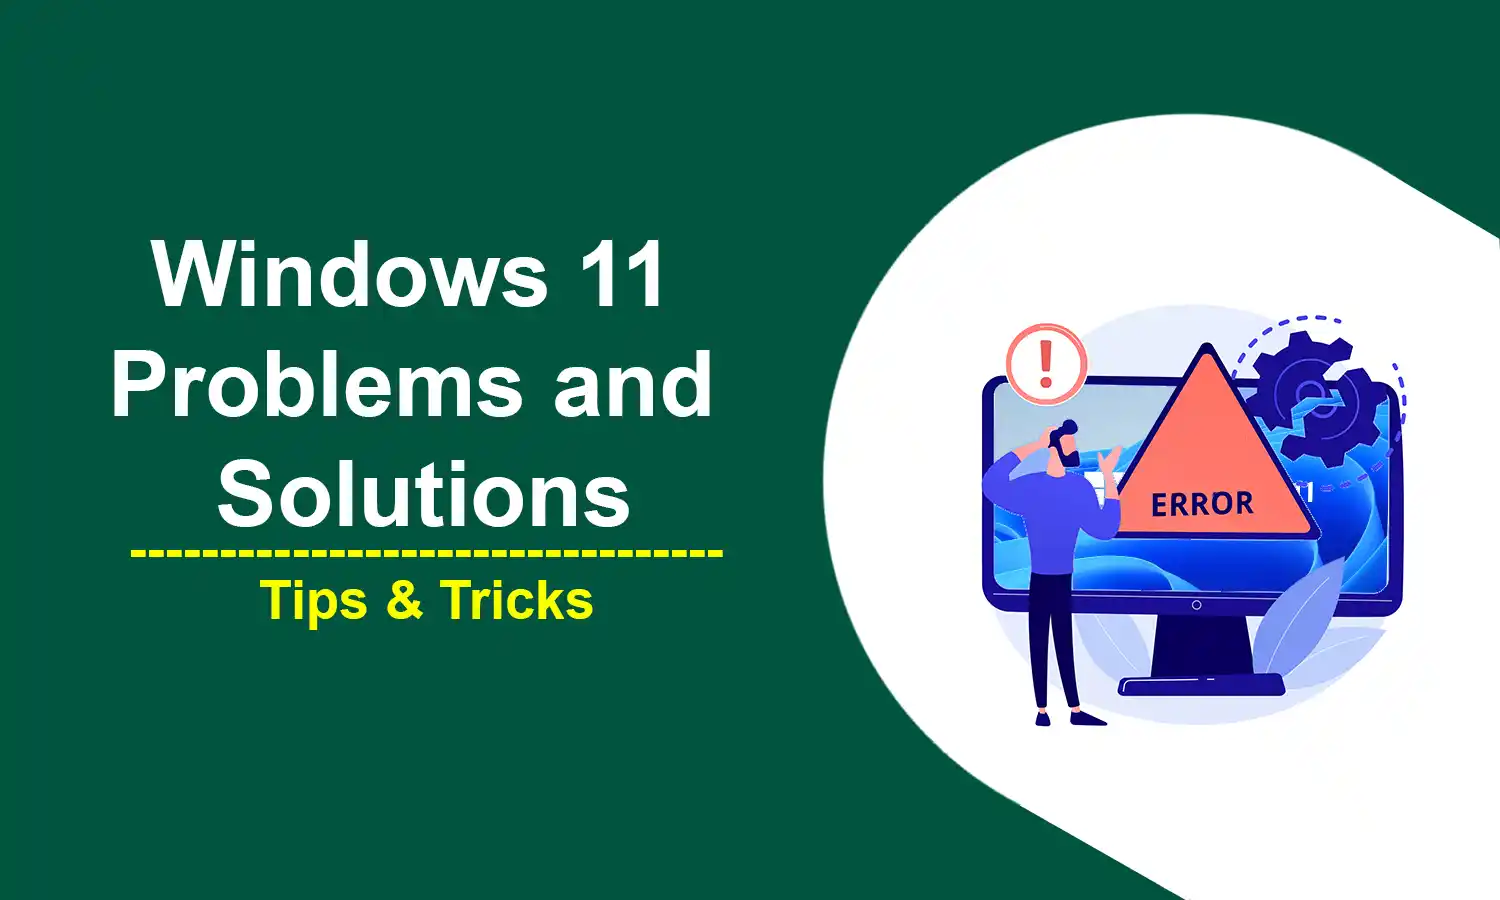 Windows 11 Problems and Solutions